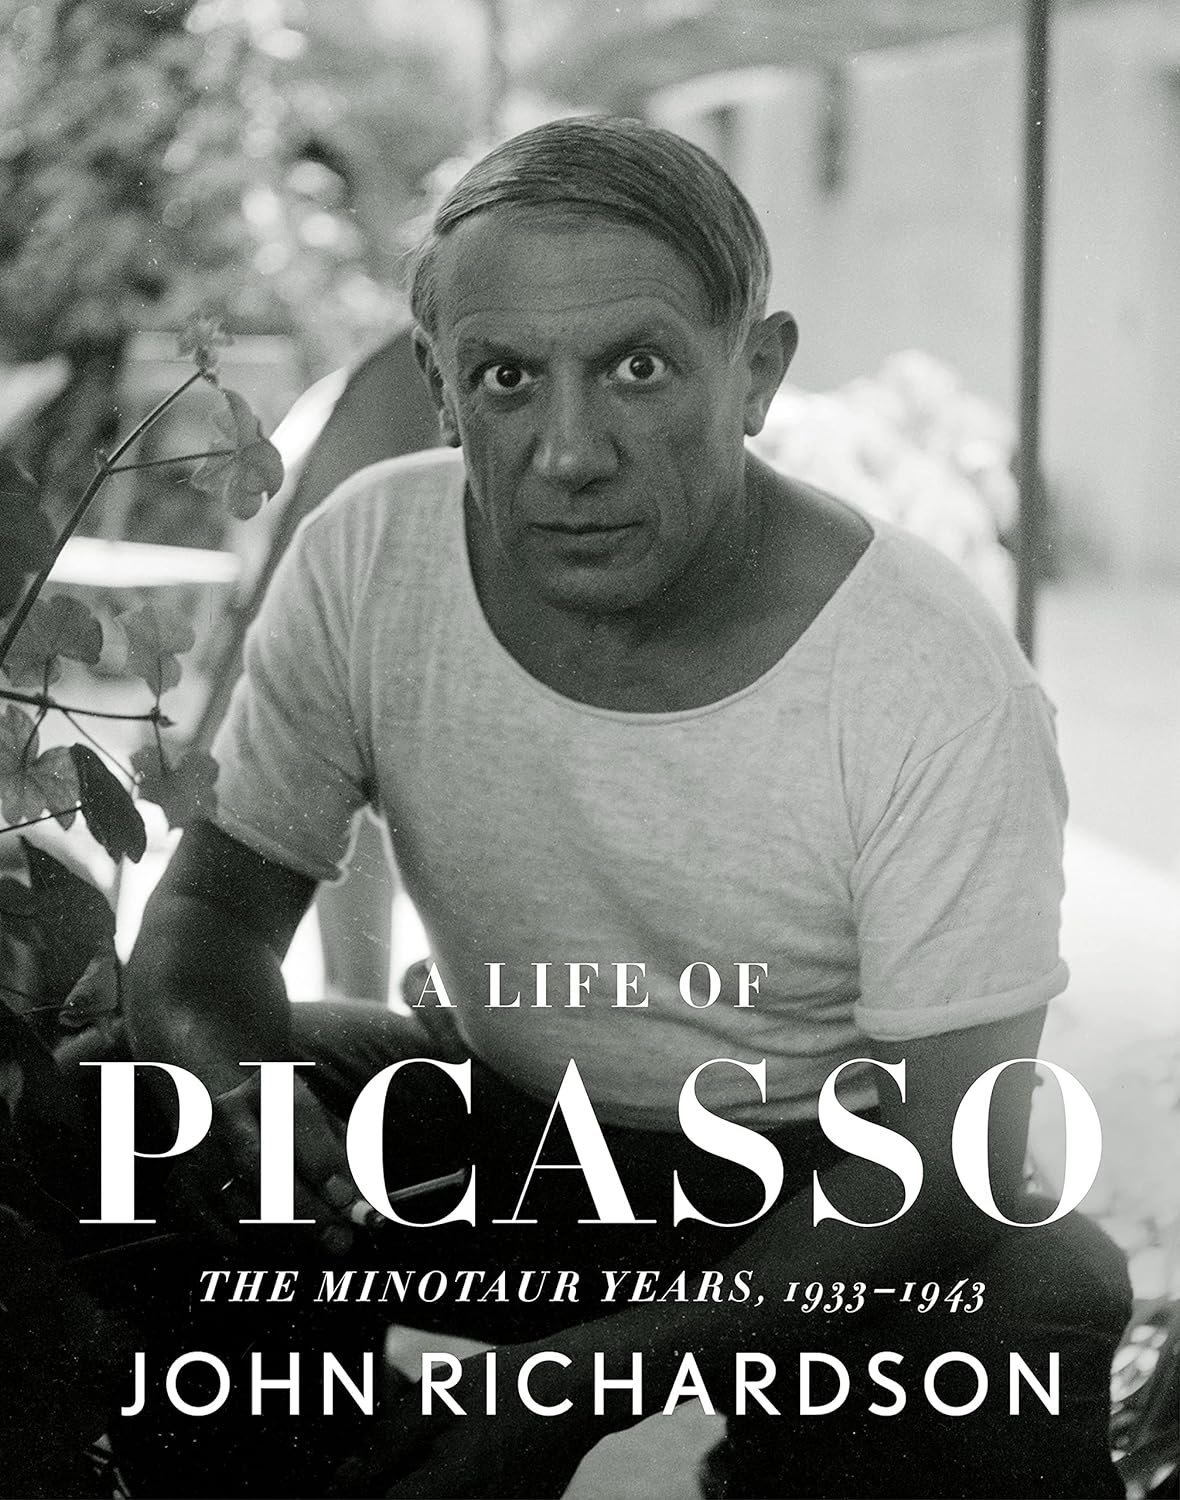 A Life of Picasso Vol. IV: The Minotaur Years 1933-1943